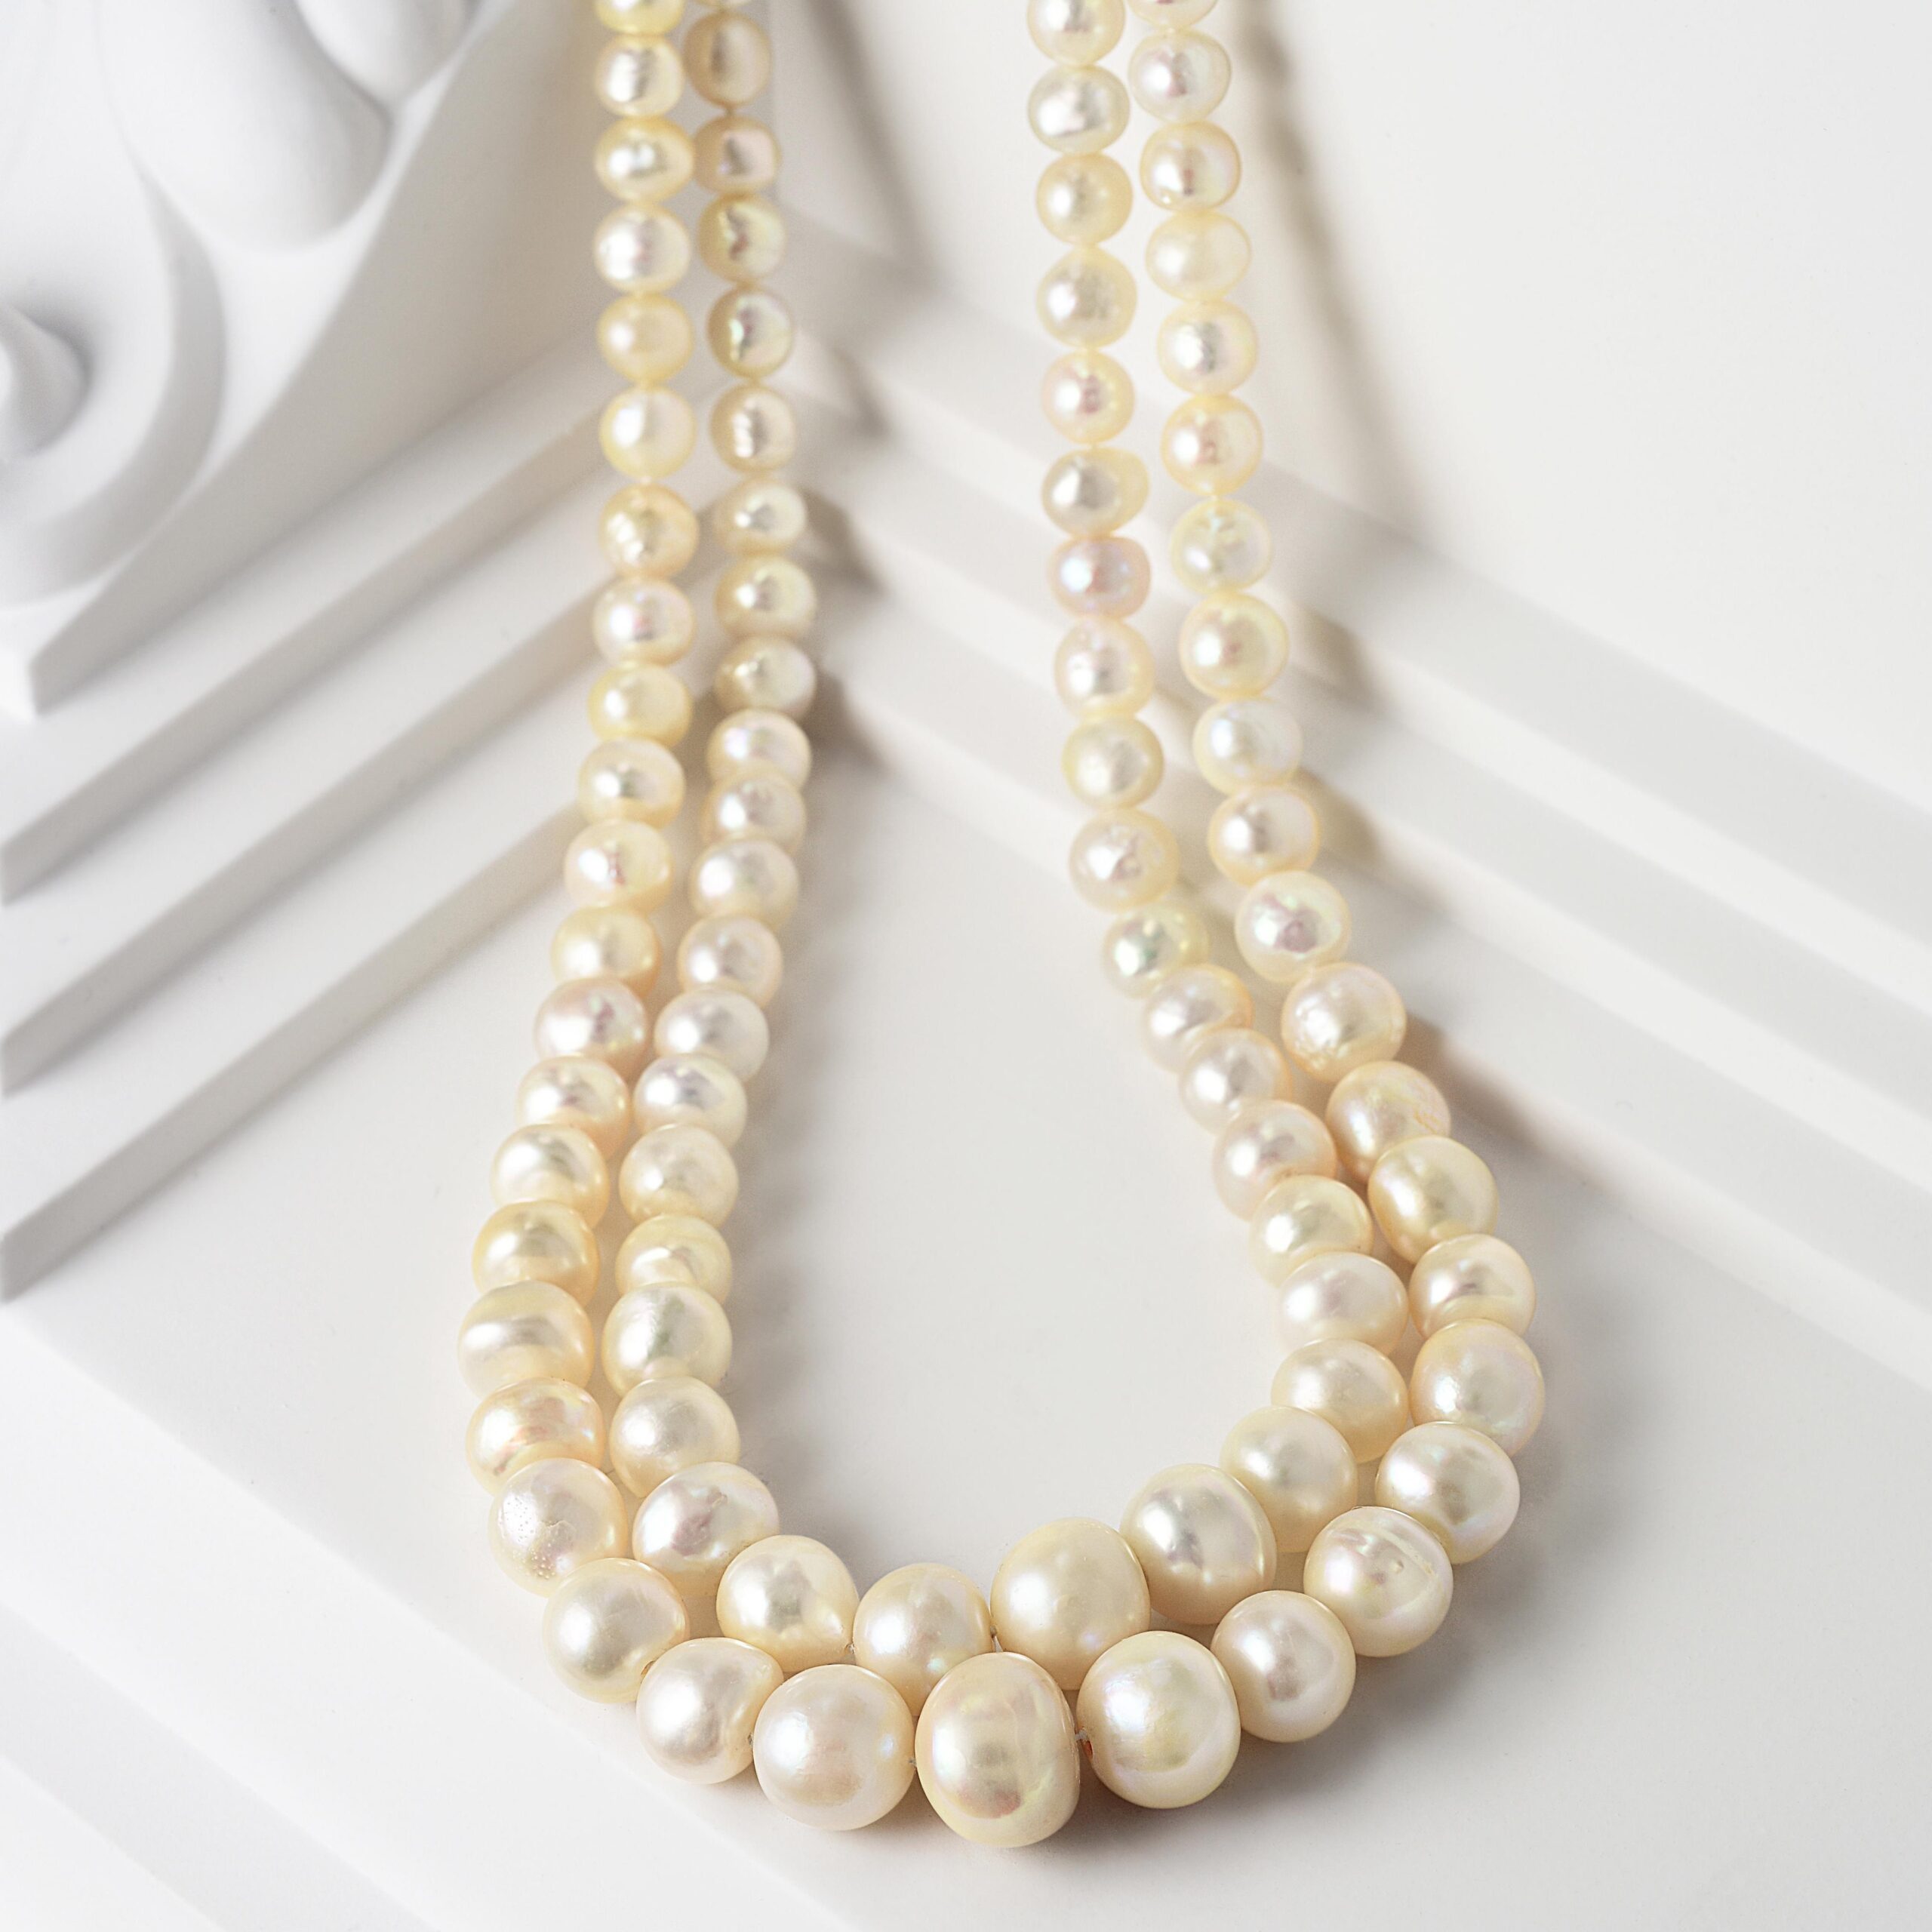 The Beauty of Pearls